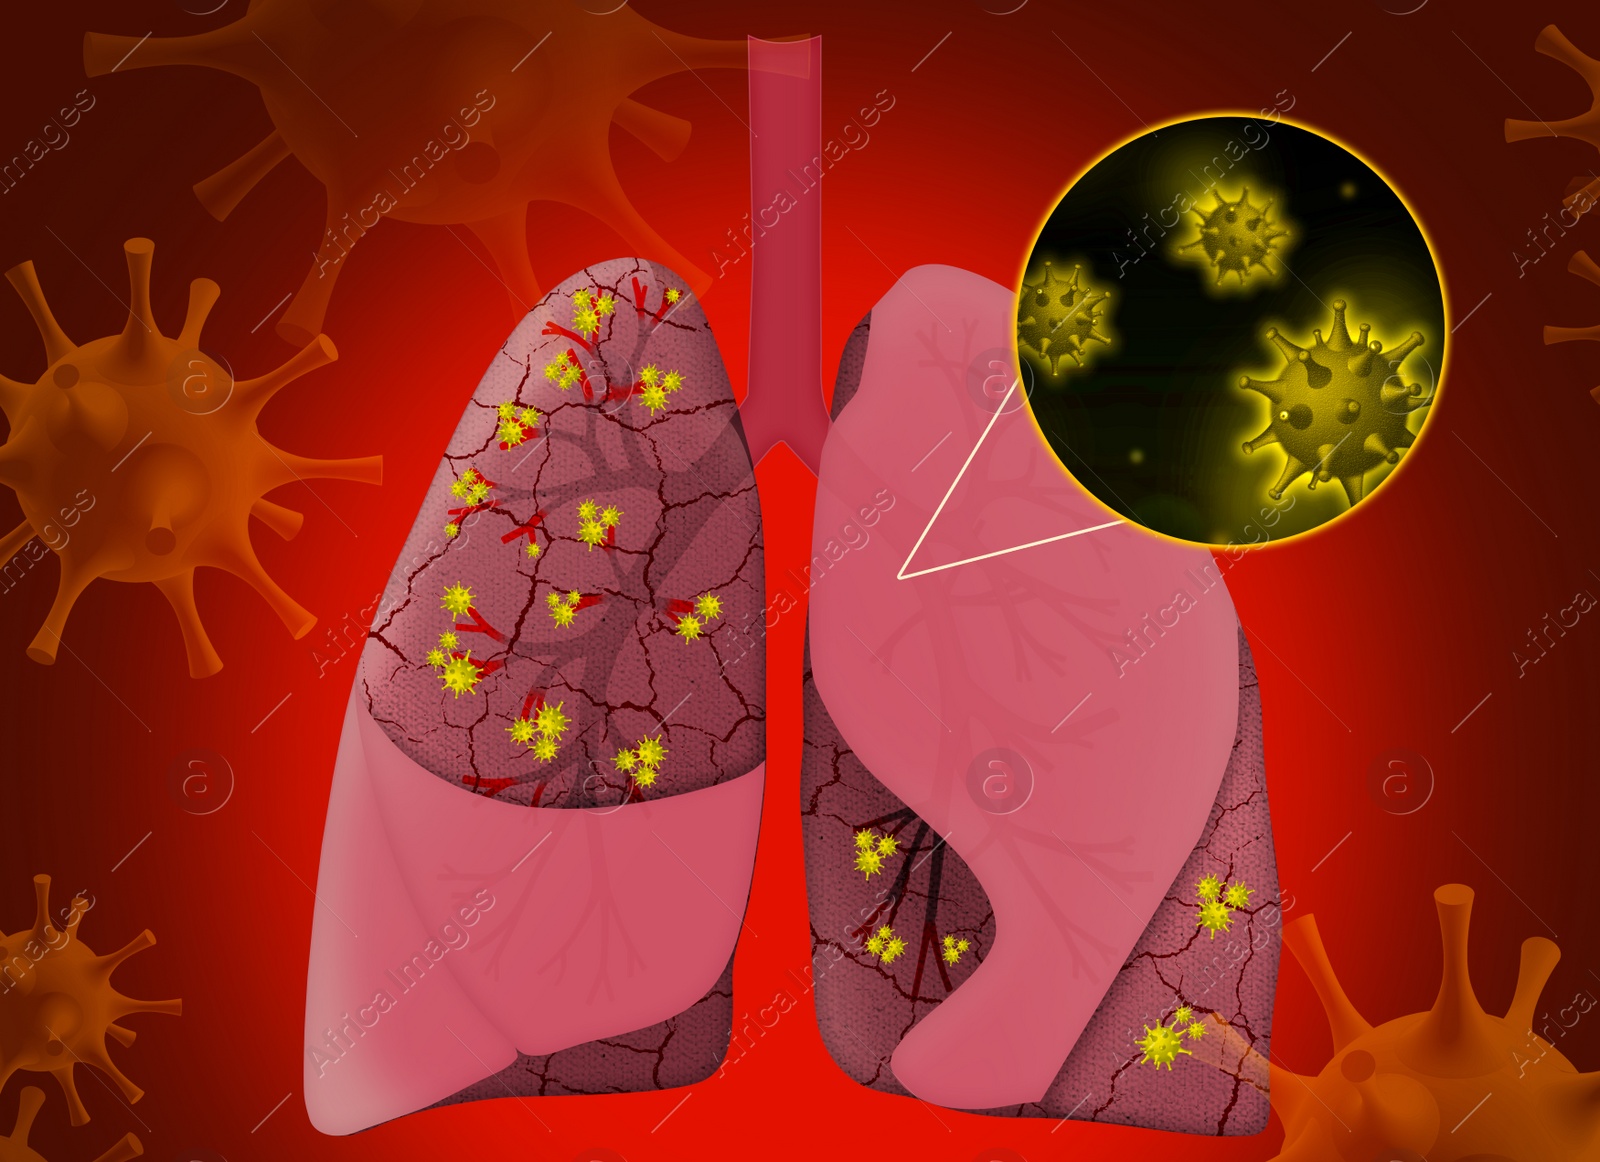 Illustration of  human lungs affected with disease on red background